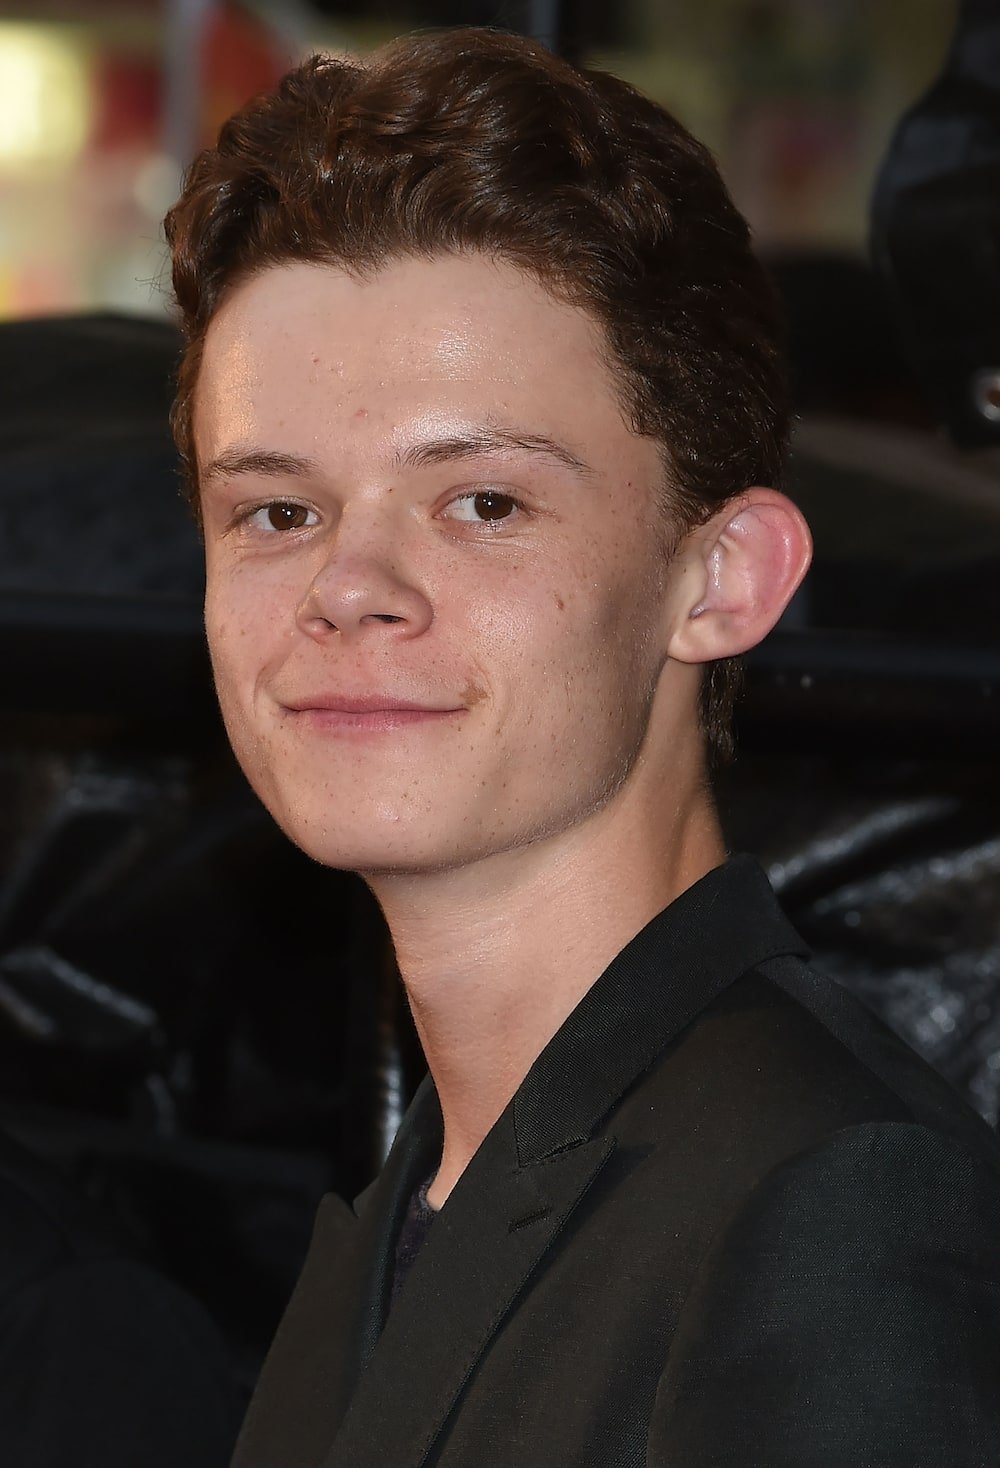 Harry Holland biography: who is tom Holland's younger brother?